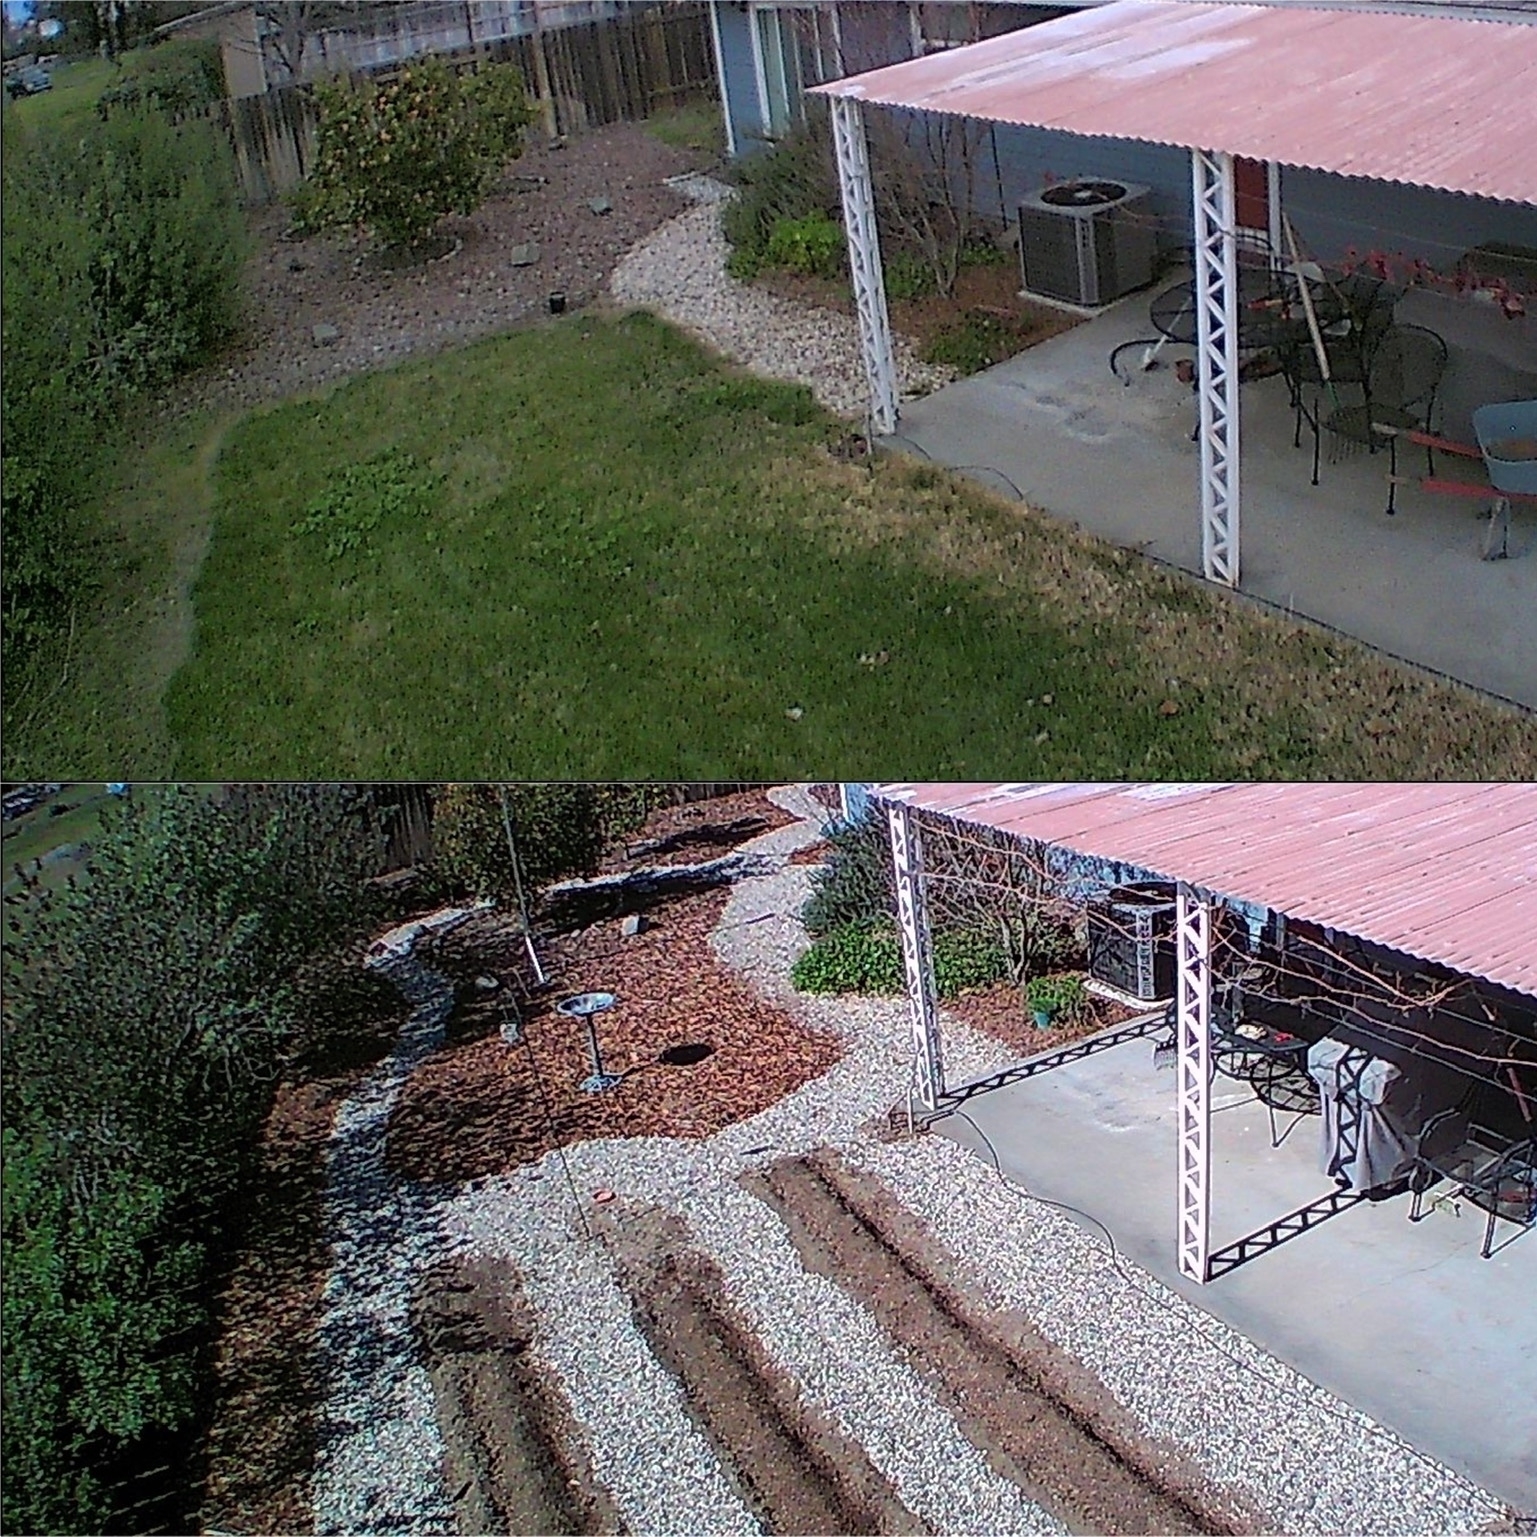 Jan 2020 photo of lawn on top and then a 2021 photo of new garden rows at the bottom